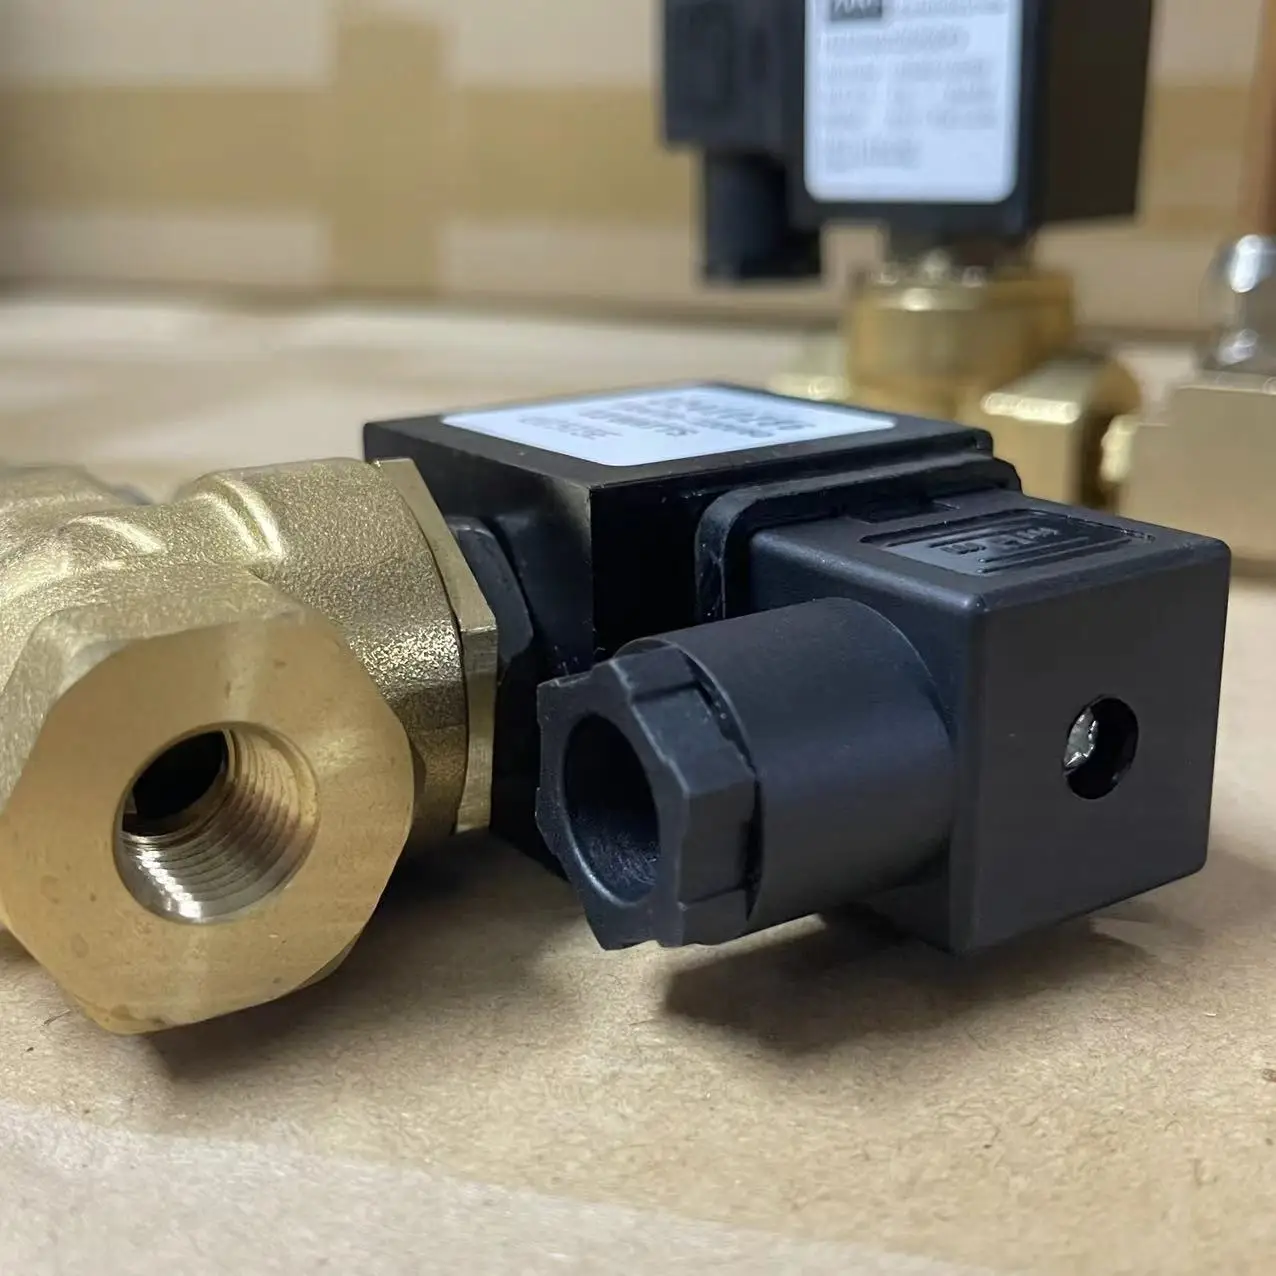 New Innovation 22410286 Drain solenoid valve air compressor accessories for electric air compressors